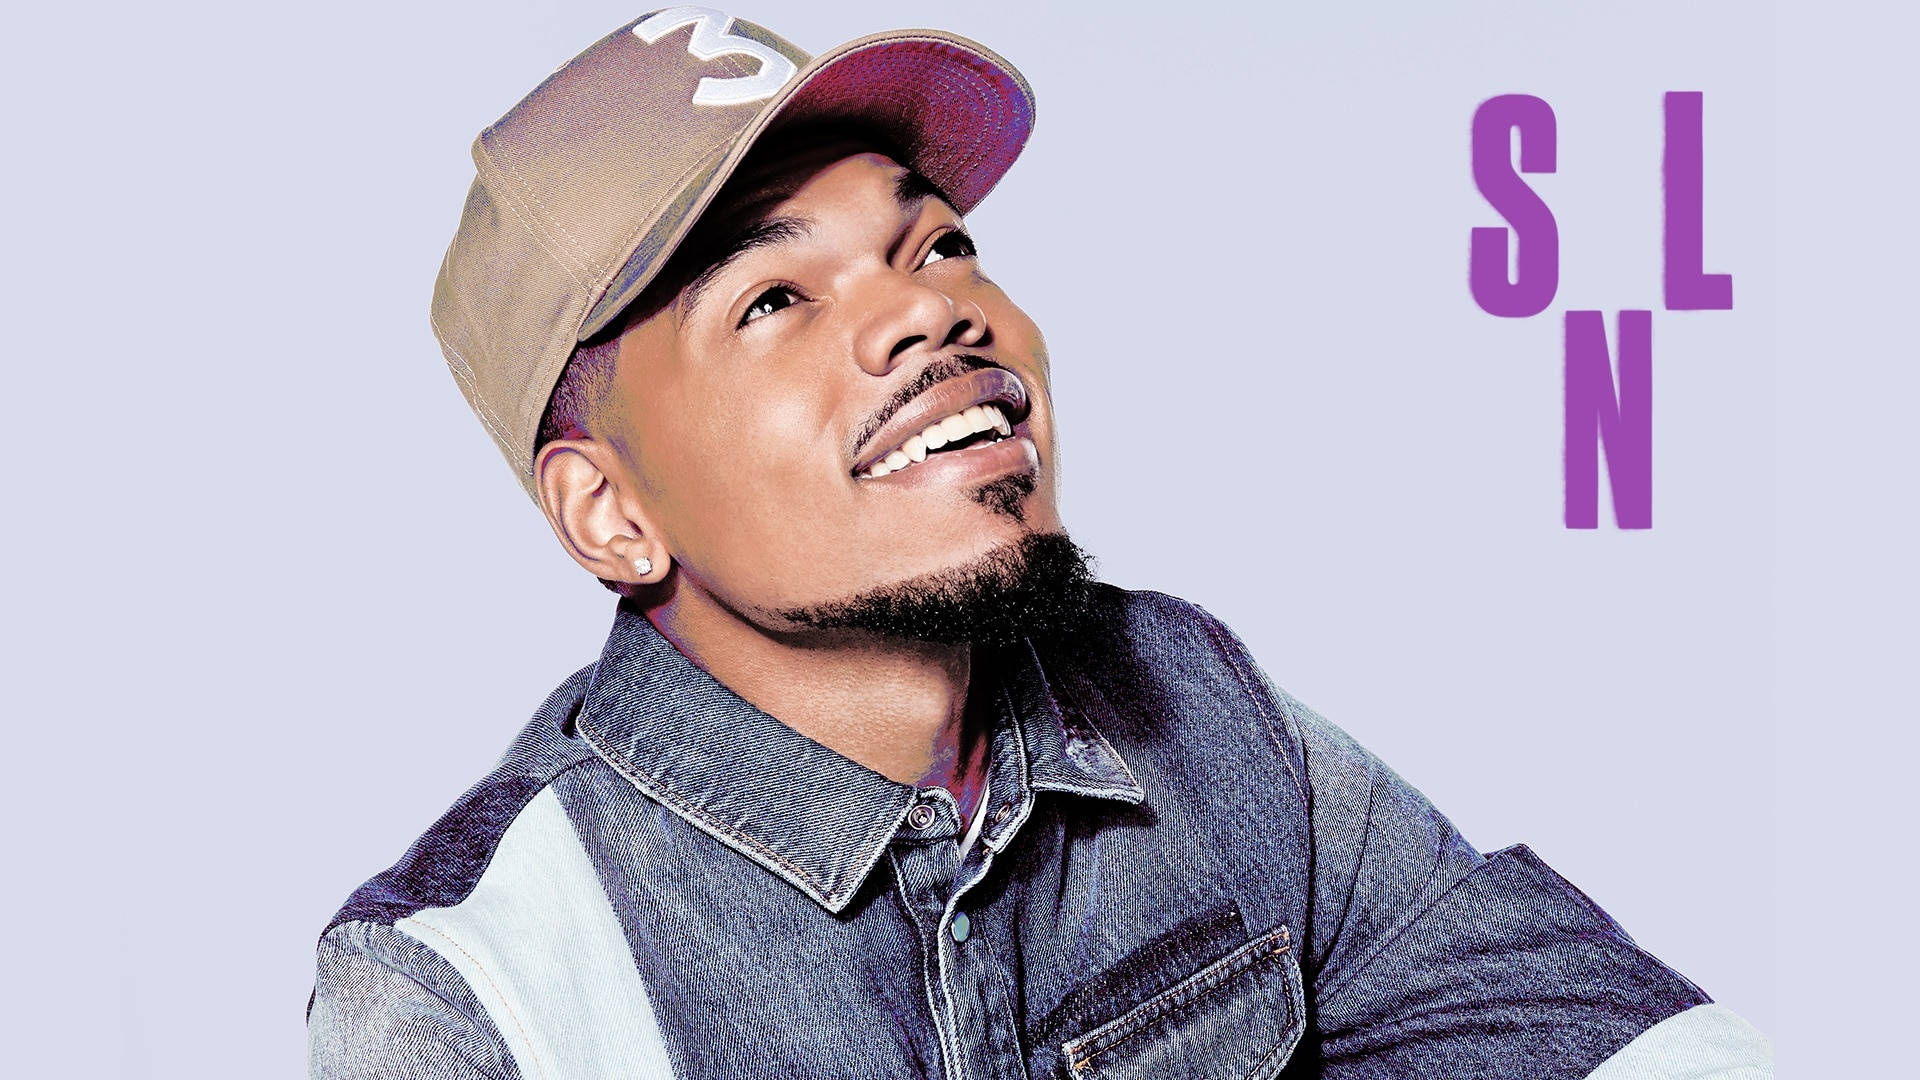 Chance The Rapper Background Wallpaper